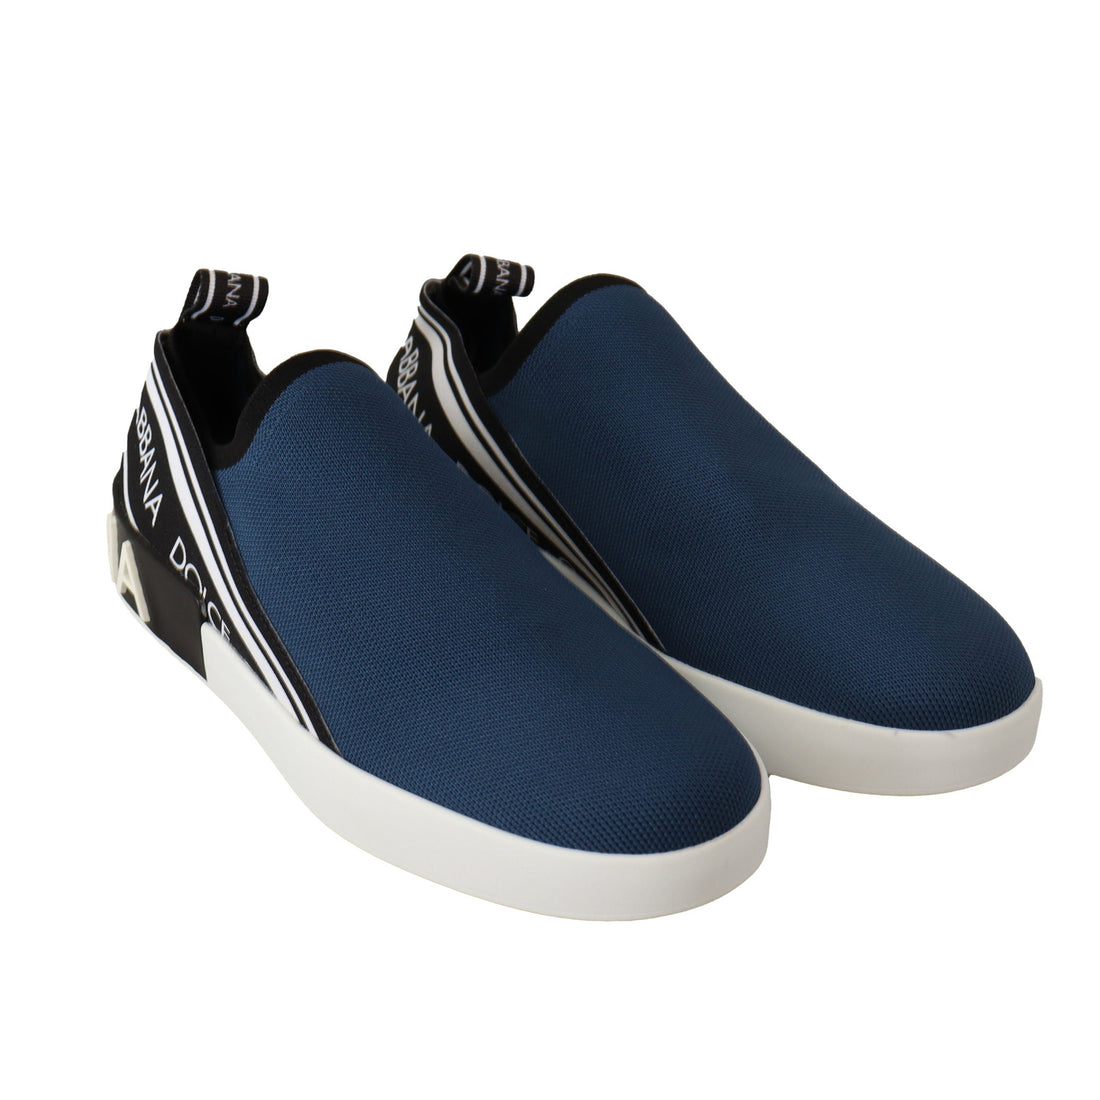 Dolce & Gabbana Blue Stretch Flats Logo Loafers Sneakers Shoes